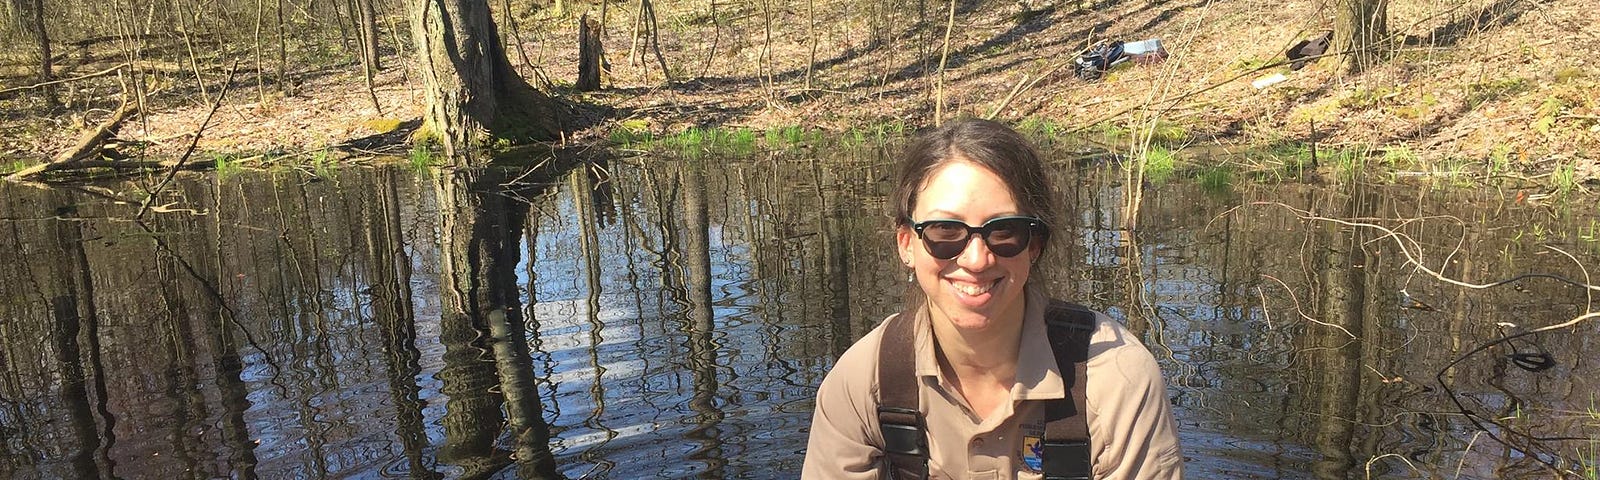 Melissa Althouse, FWS Scholar and Service Biologist, holds the egg mass of an Spotted salamander (Ambystoma maculatum) while monitoring vernal pools for spring breeding amphibians.